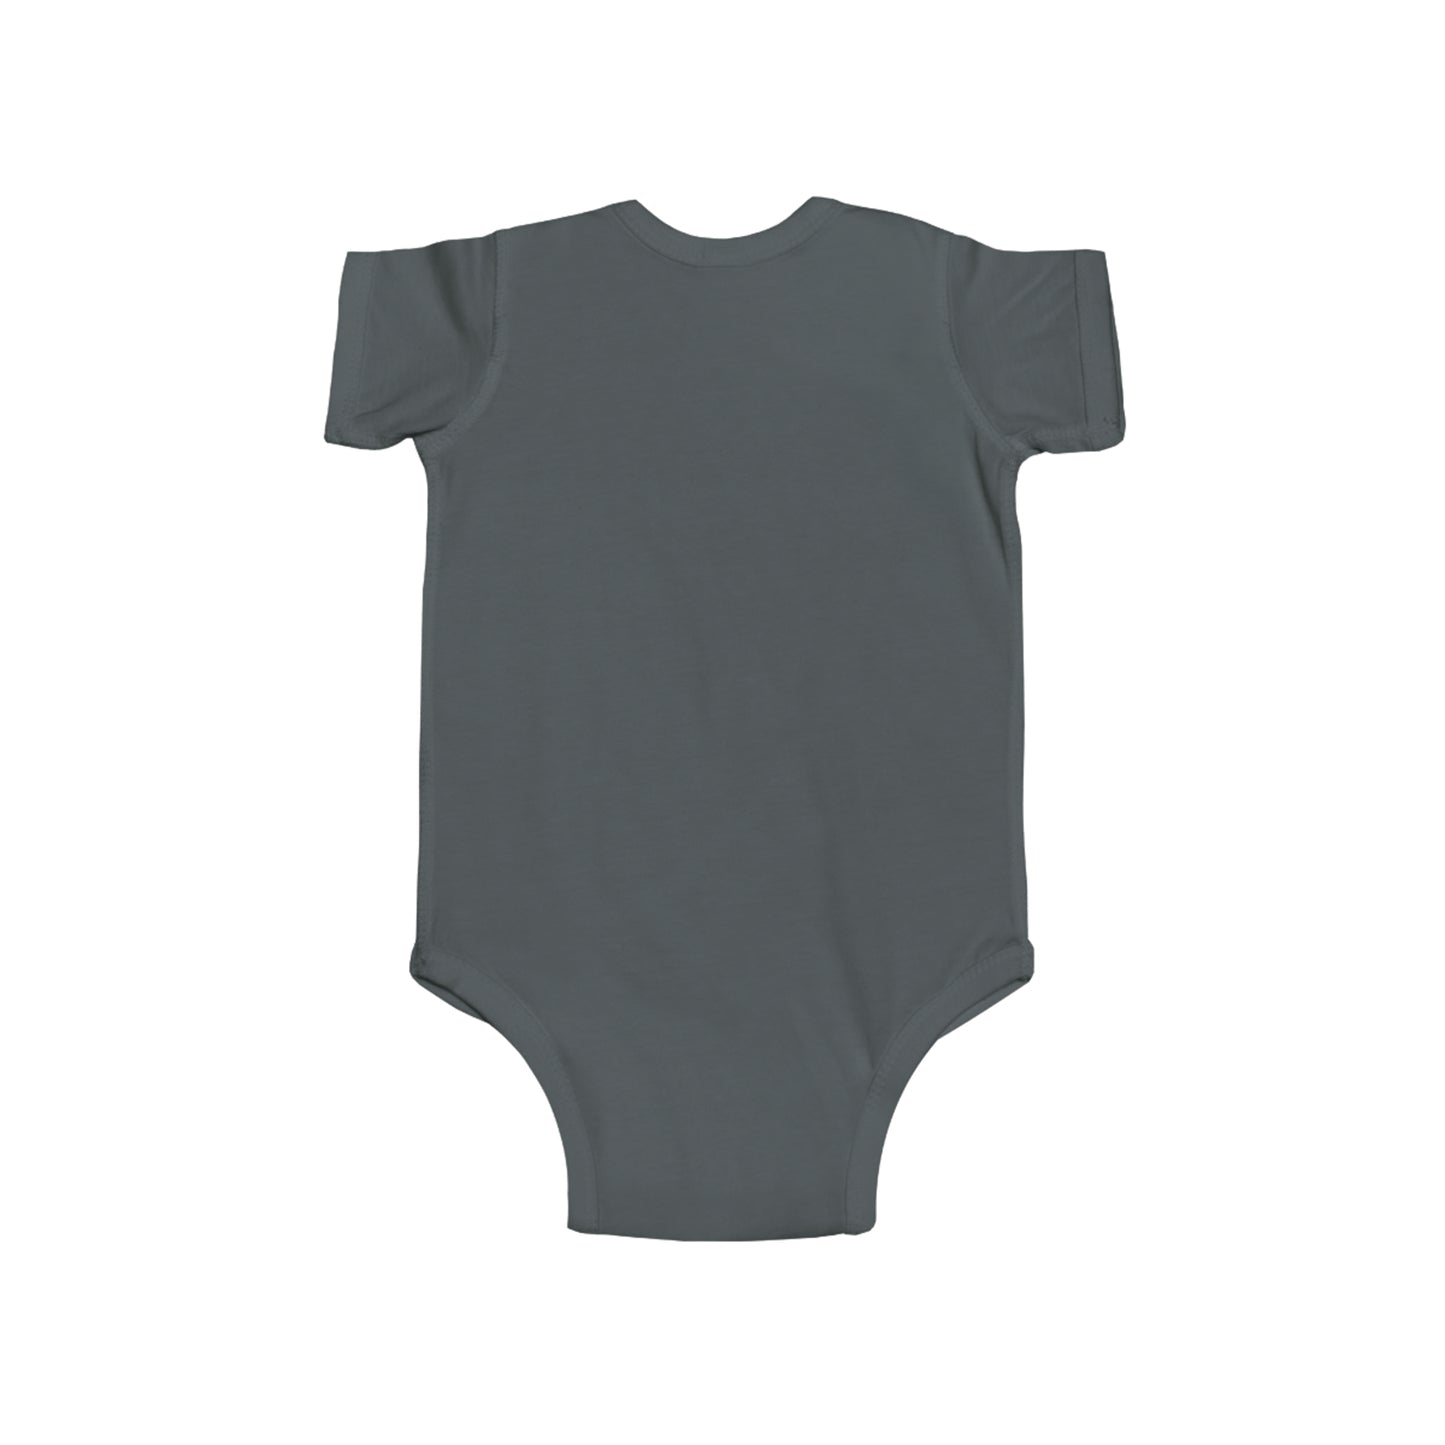 Infant Baby Insect Graphic Jersey Bodysuit Onesie